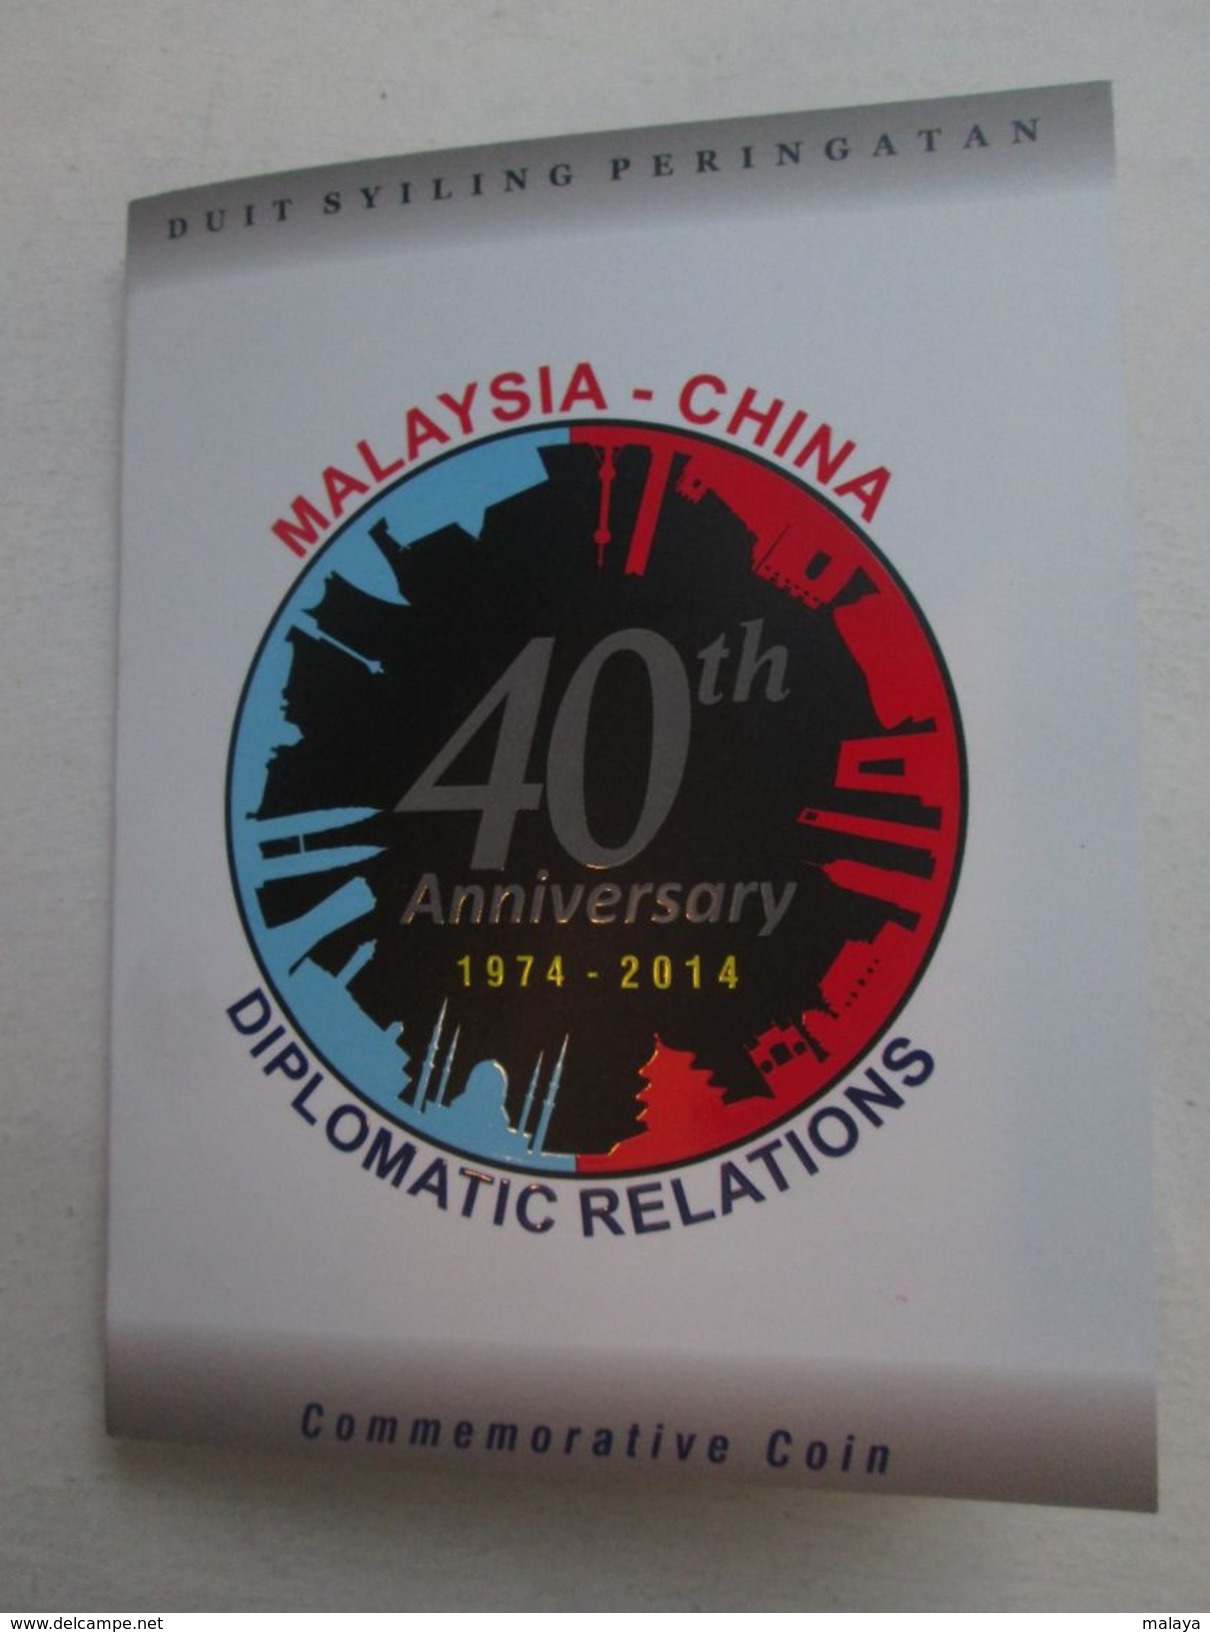 Malaysia China 2014 40th Diplomatic Relations -1  Ringgit Cards Coin Commemorative Nordic Gold BU 1 Ringgit Coin - Malaysia